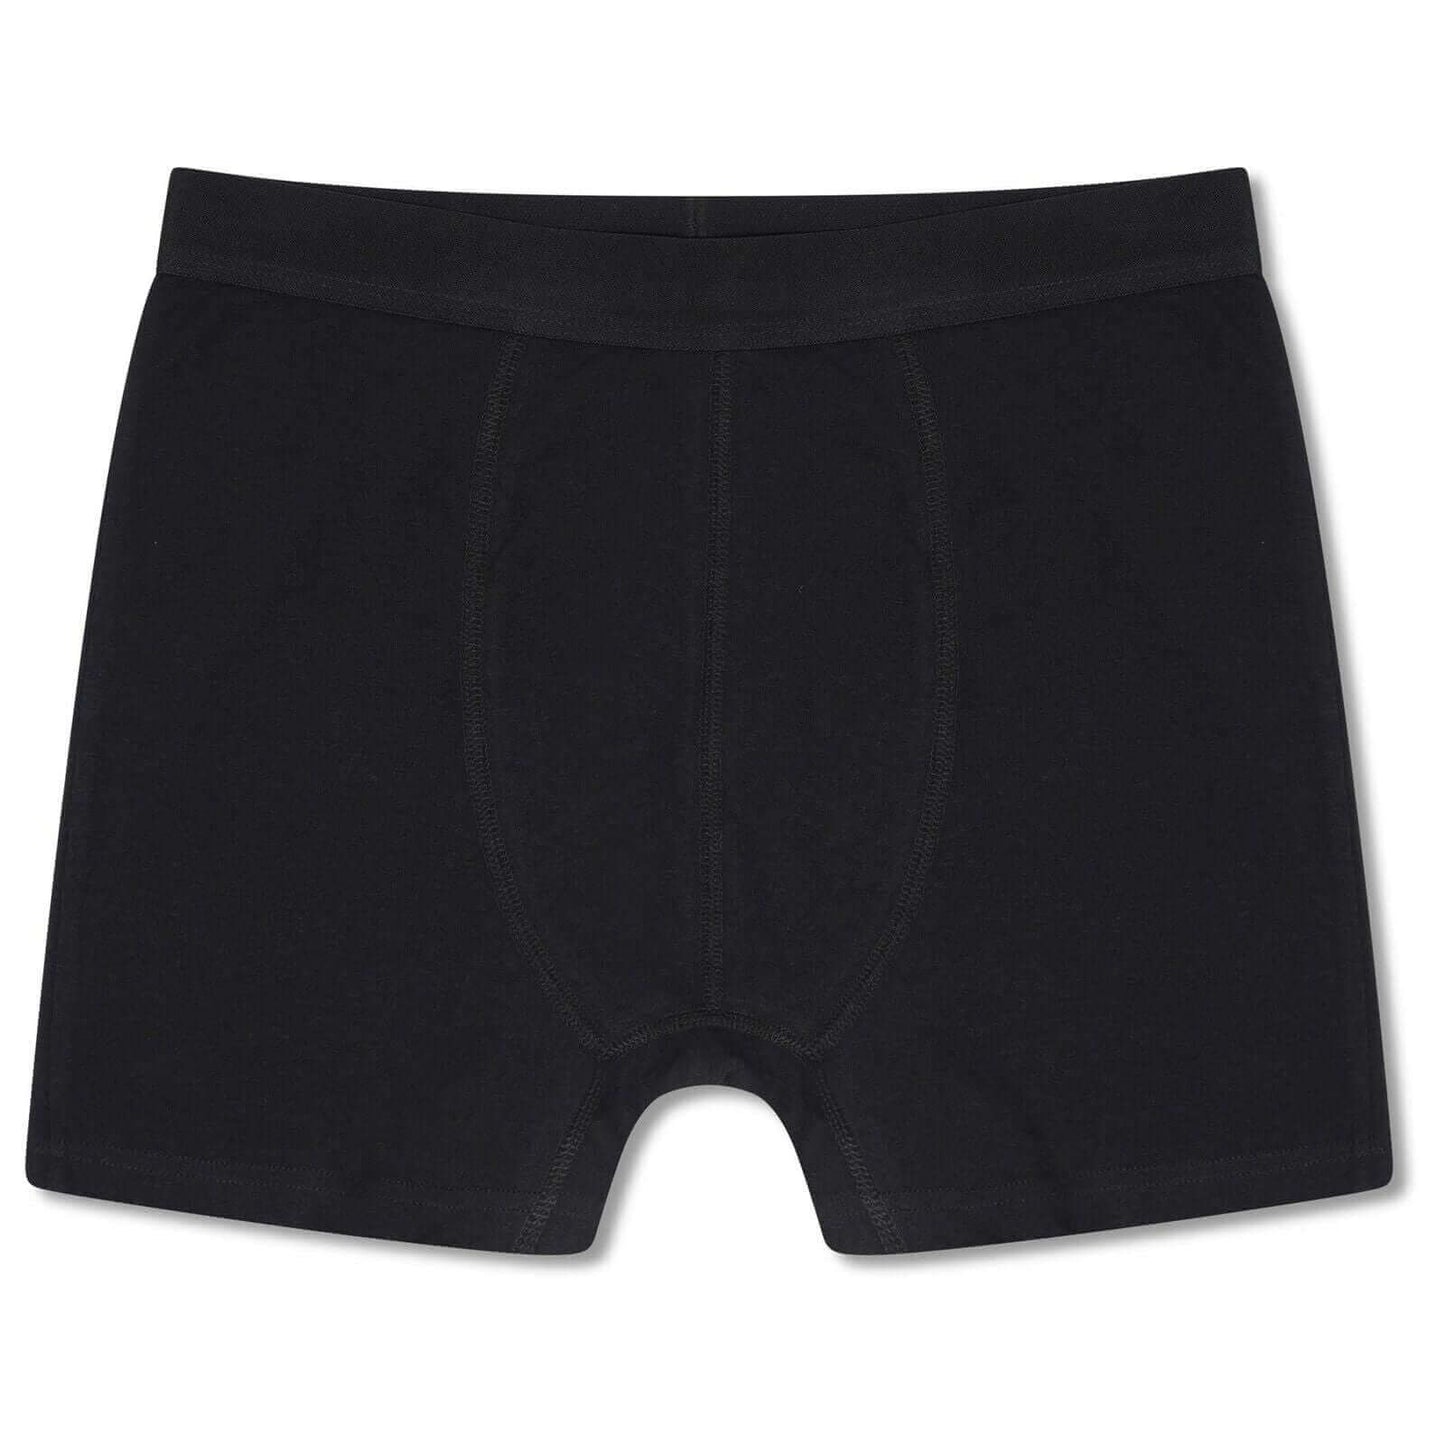 Pack of 5 Boys Boxer Trunk Shorts Organic Cotton Stretch Underwear For Kids. Buy now for £9.00. A Boxer Shorts by Sock Stack. black, boxer shorts, childrens, classic boxers, comfortable, cotton, kids, pants, sports, trunks, underwear.